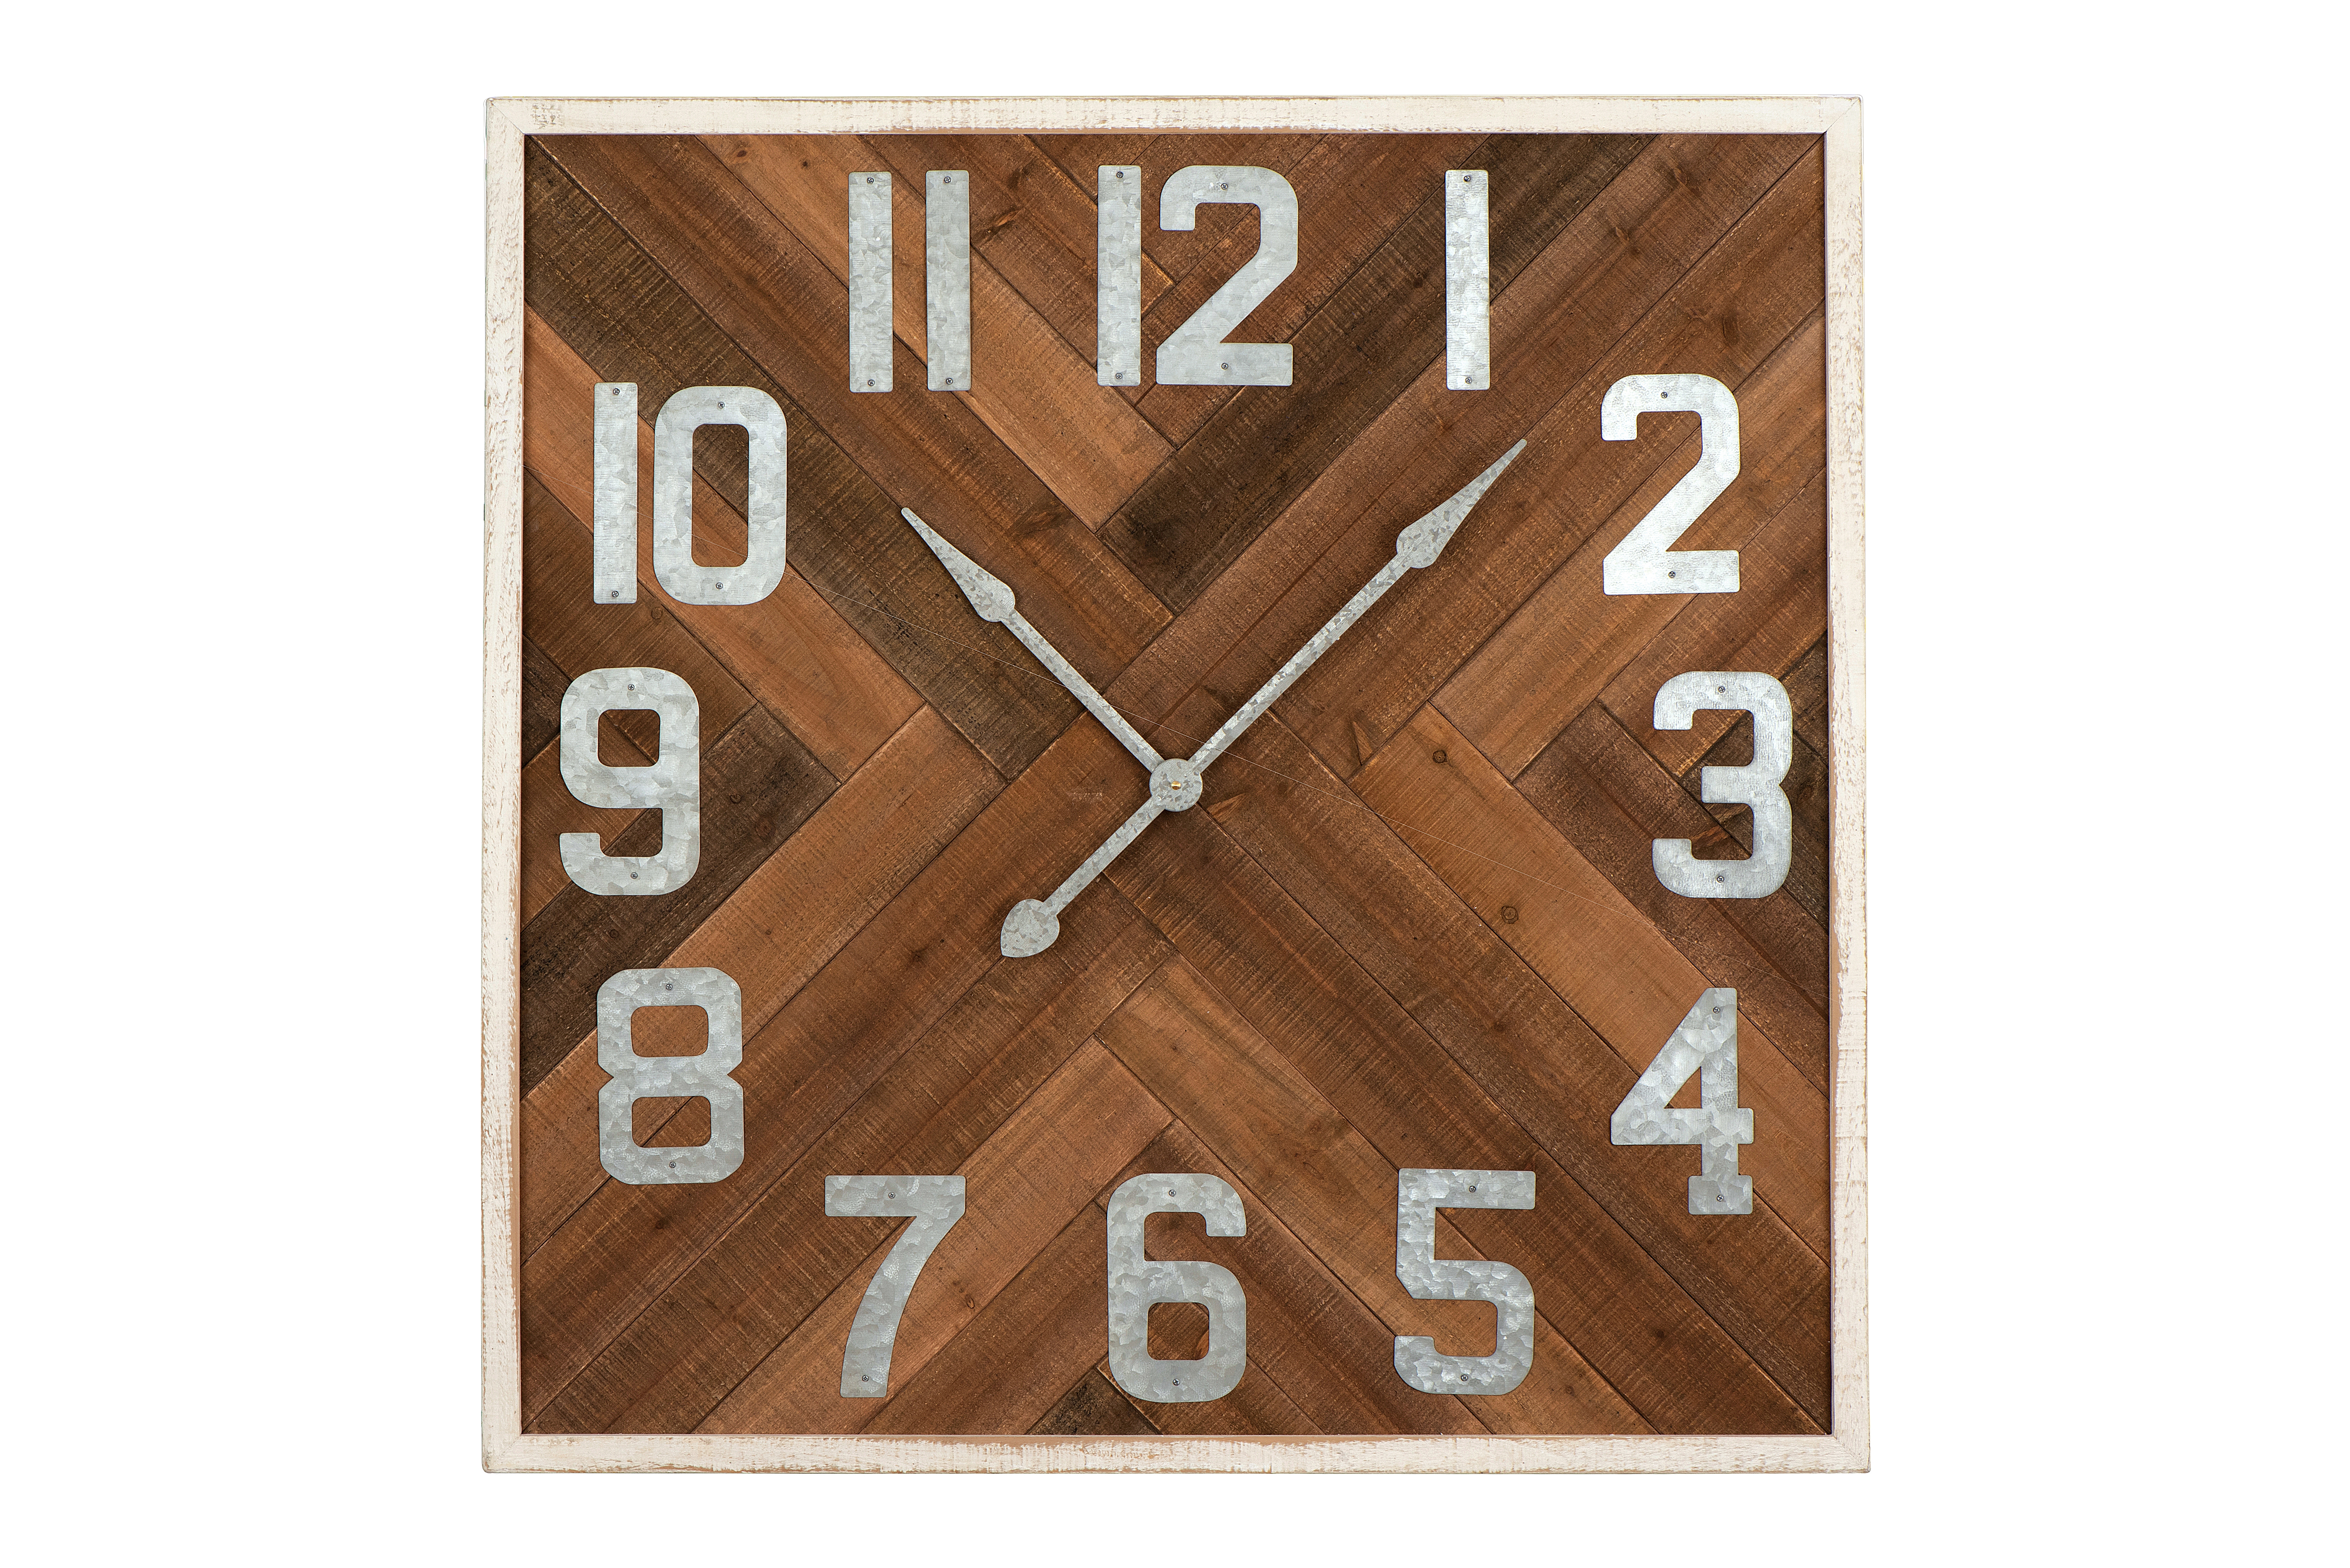 36" Square Herringbone Inlay Stained Wood Wall Clock - Image 0